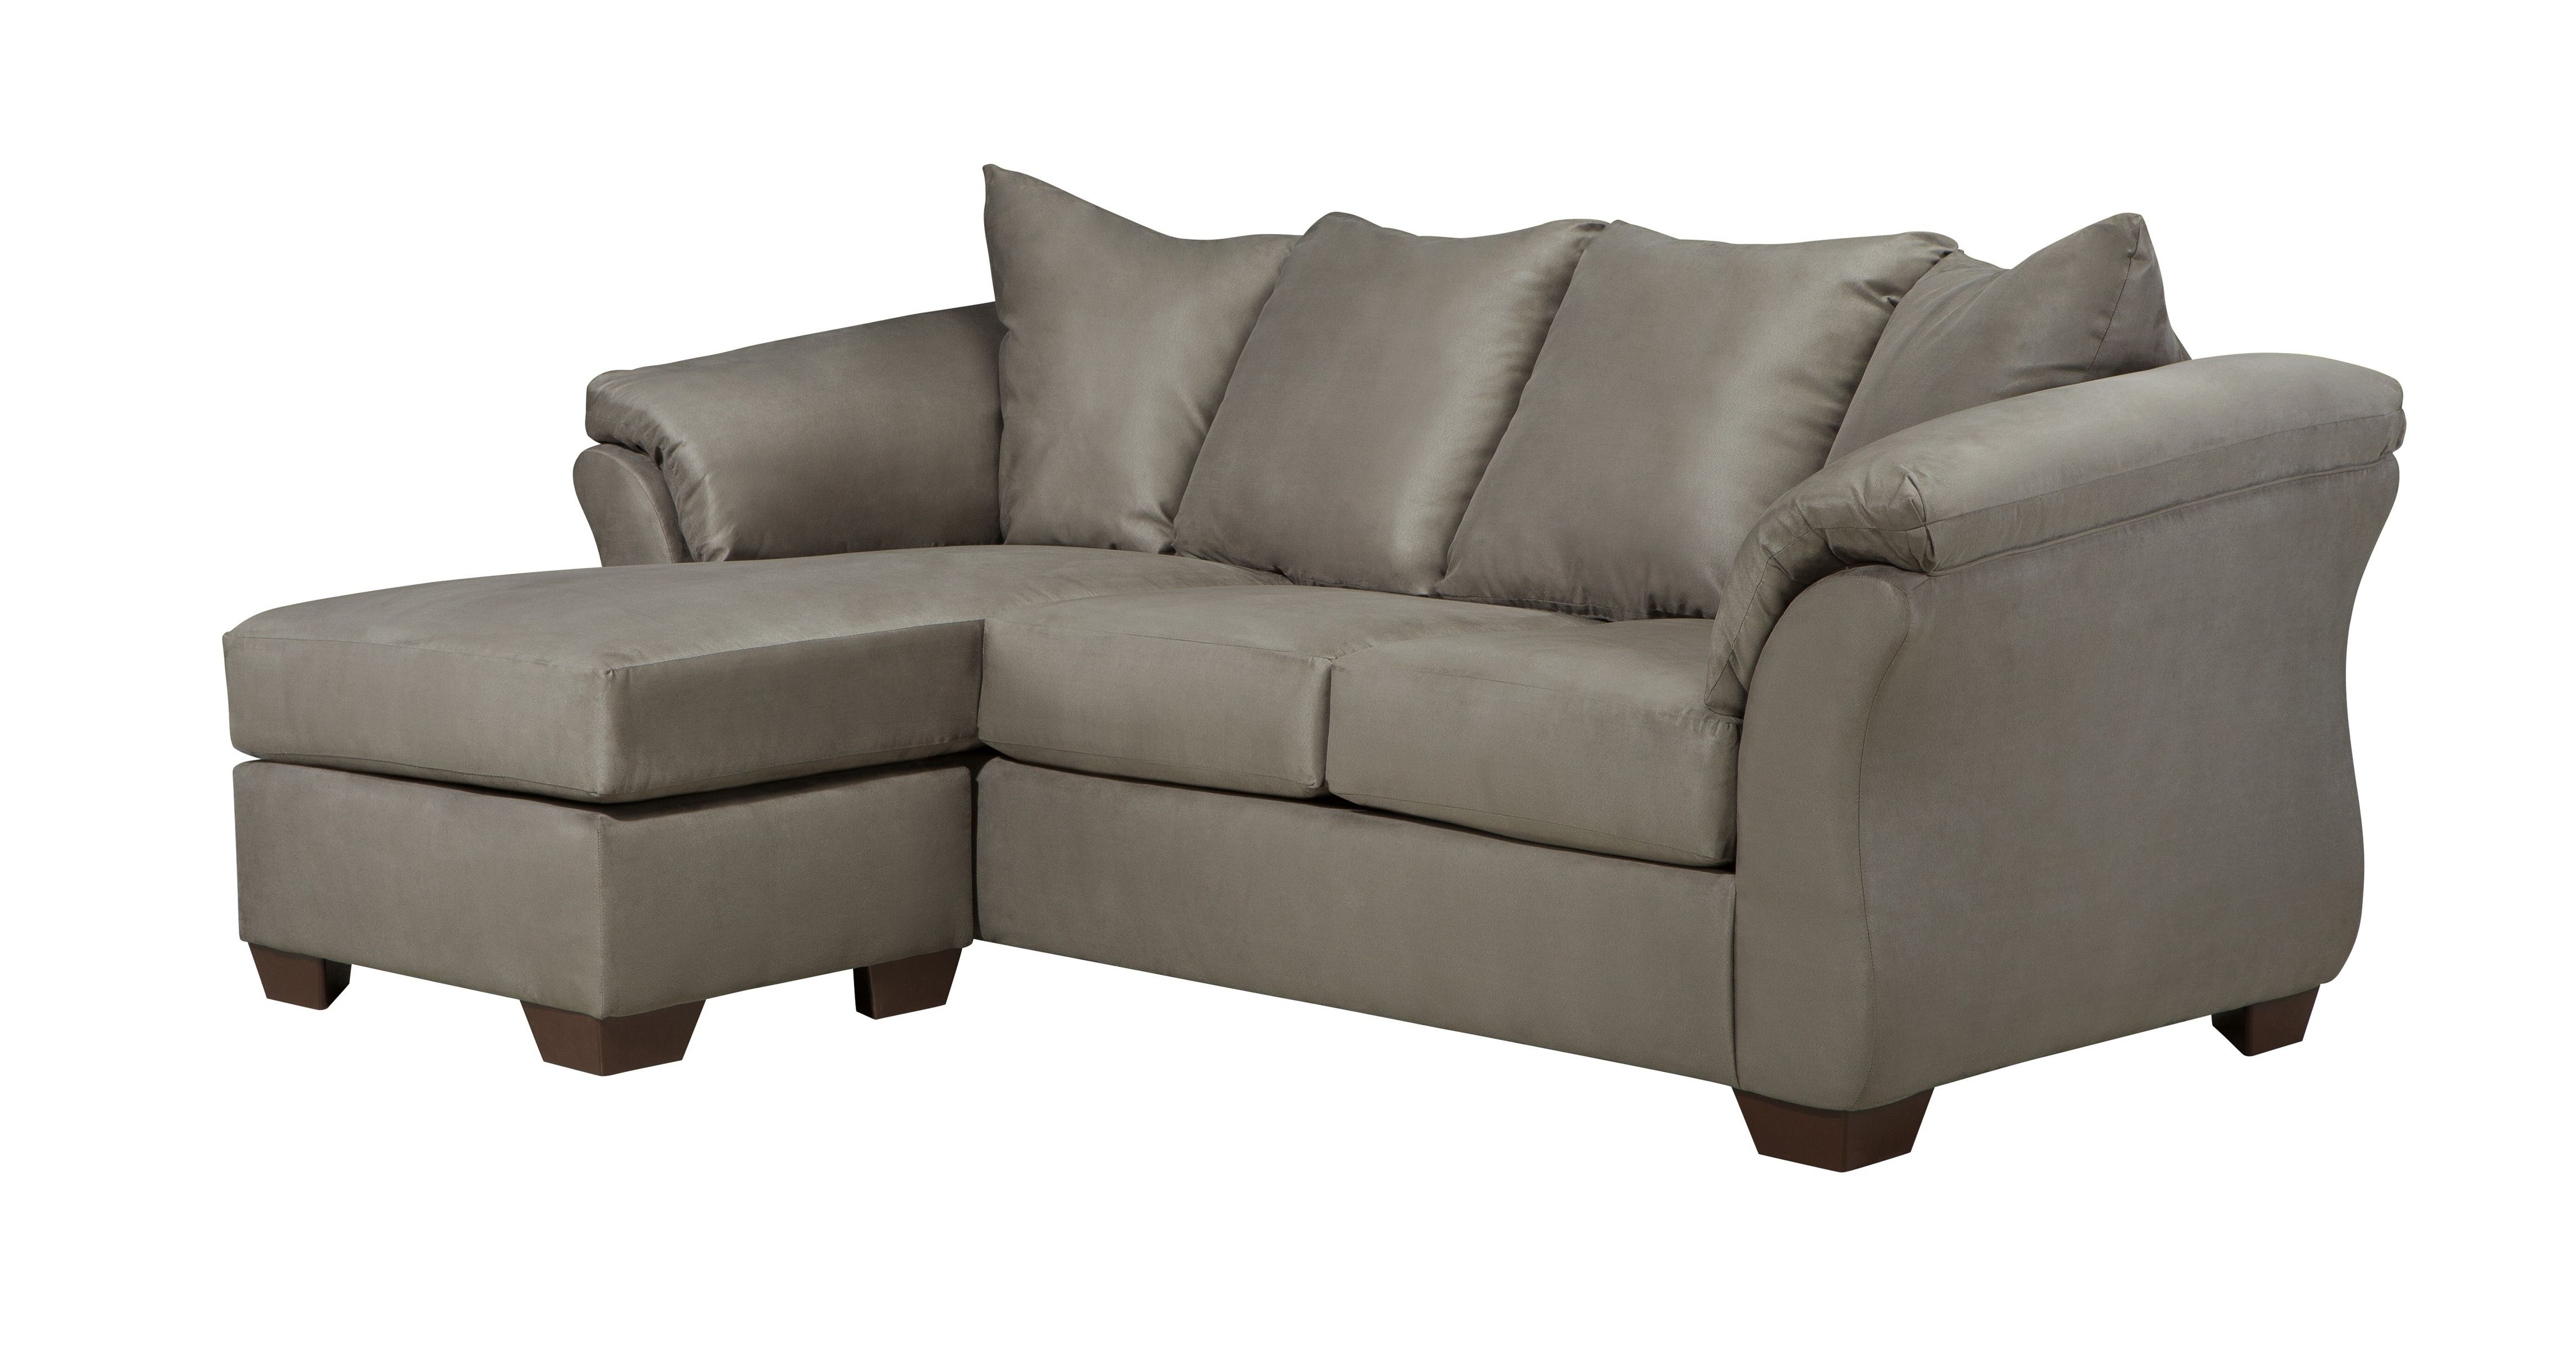 Ashley Chaises Within 2018 Ashley 7500518 Sofa Chaise (View 14 of 15)